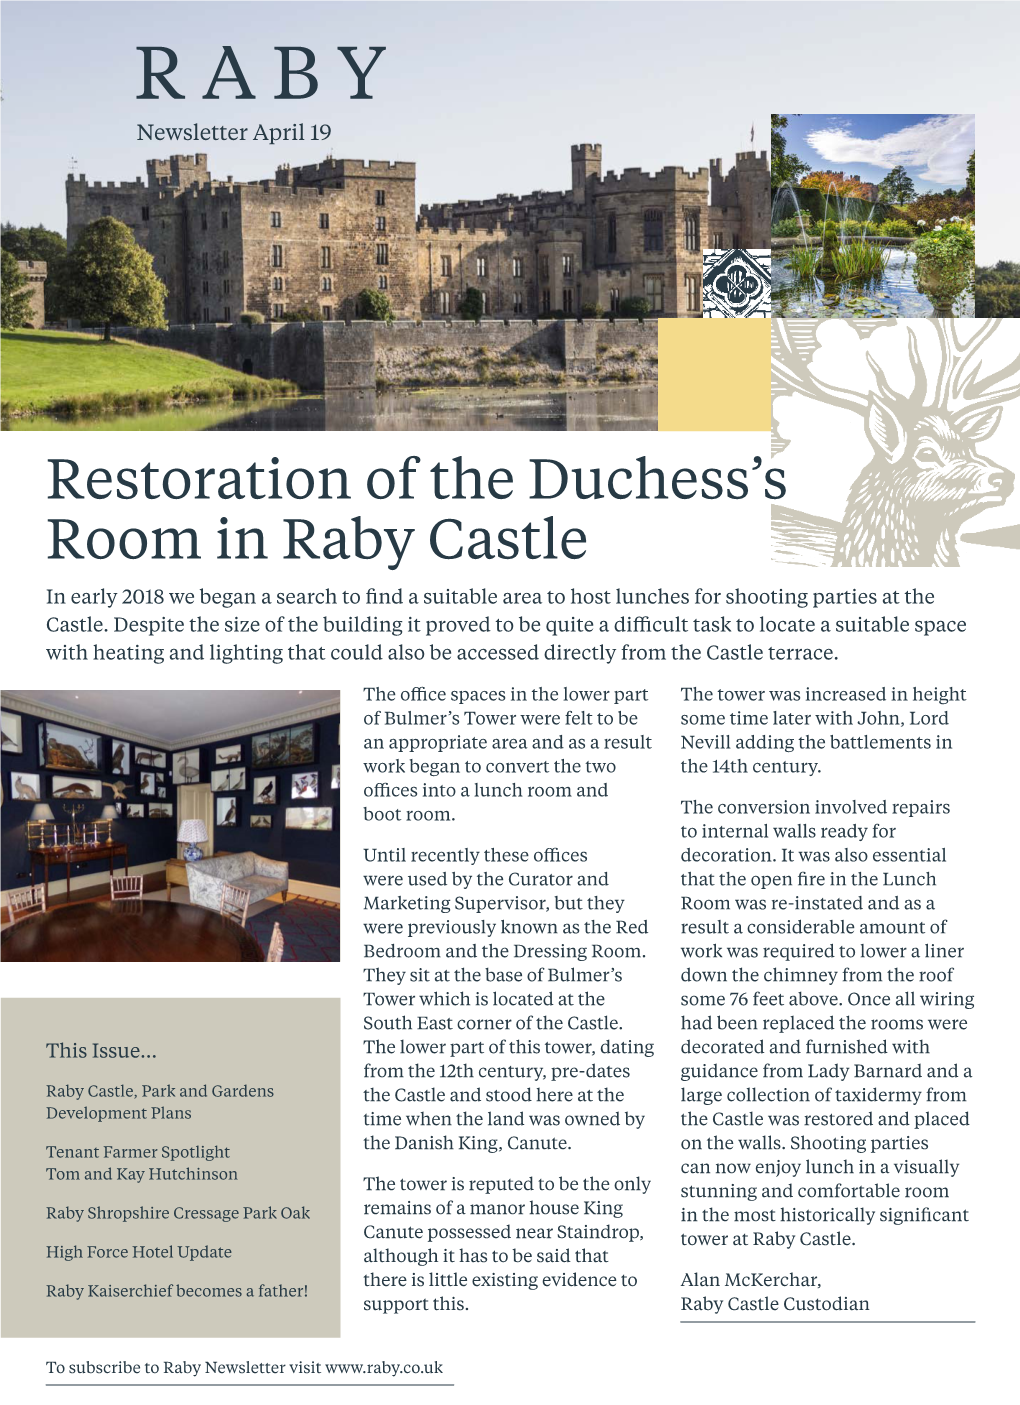 Restoration of the Duchess's Room in Raby Castle